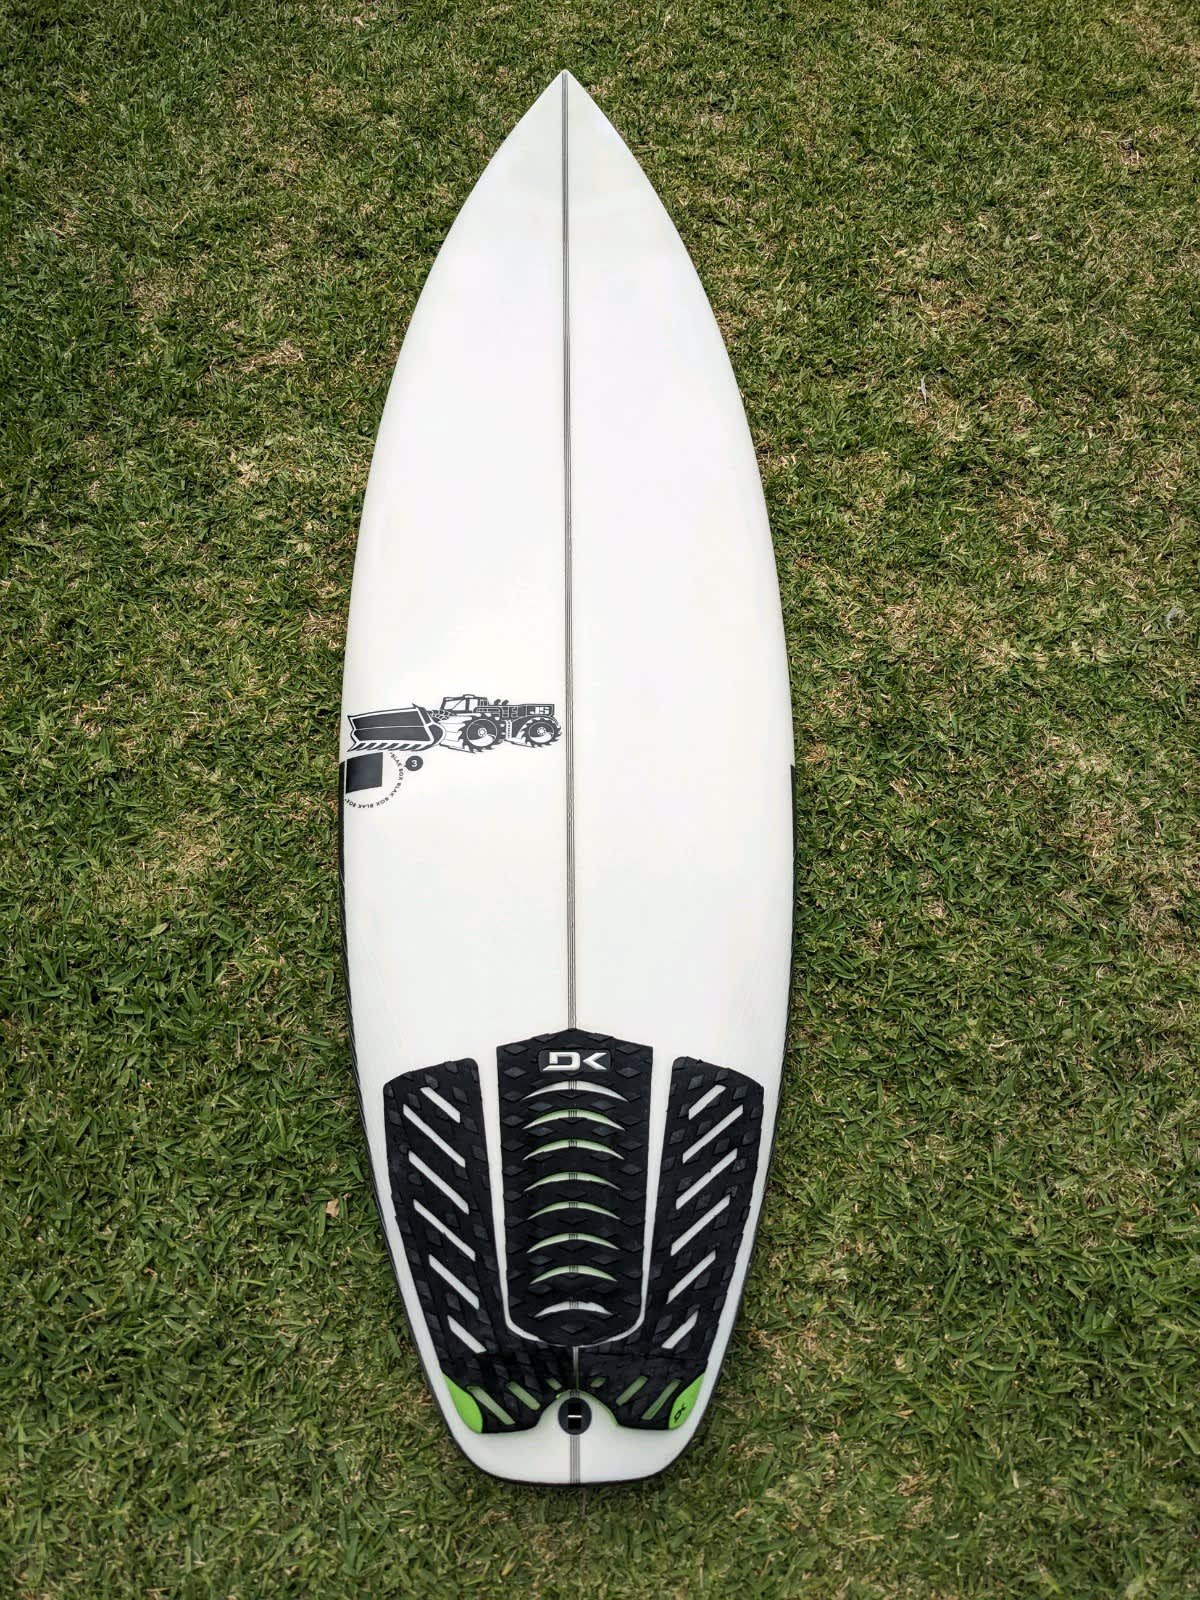 4 4 4 4 in New South Wales | Surfing | Gumtree Australia Free